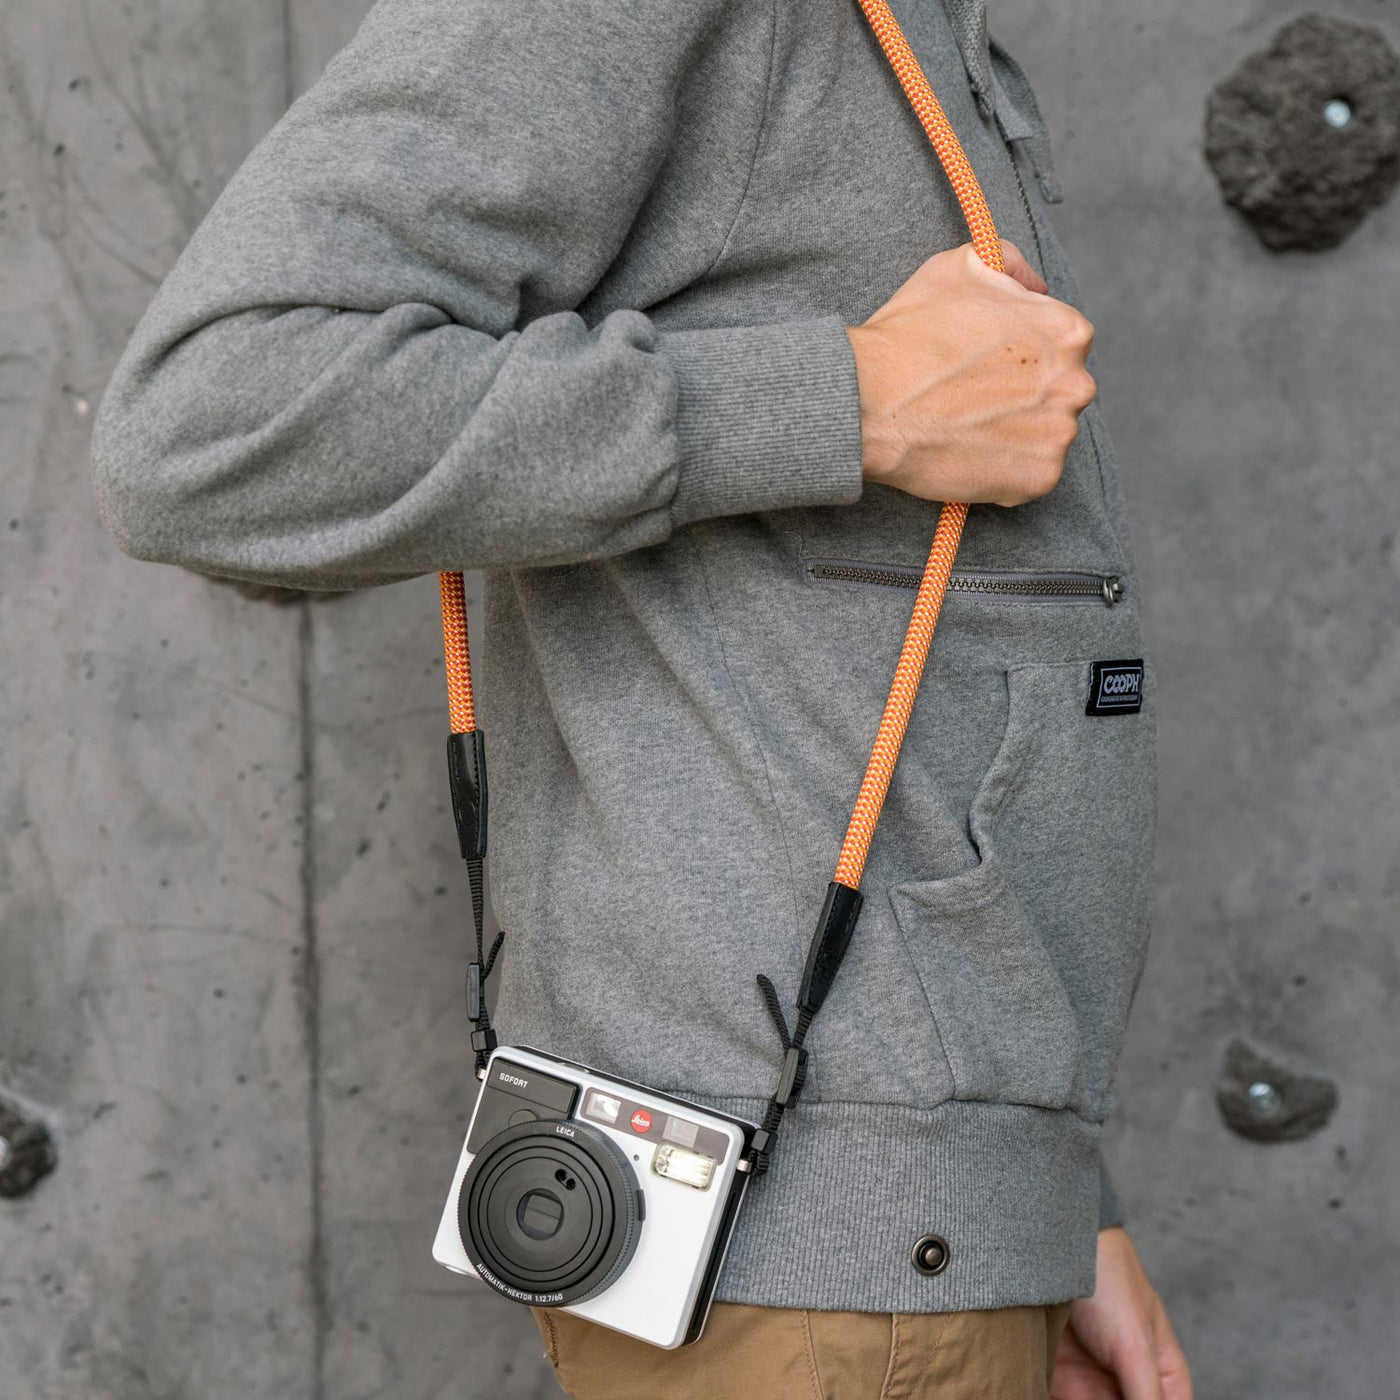 Leica camera on a photographer's hip held with rope strap 